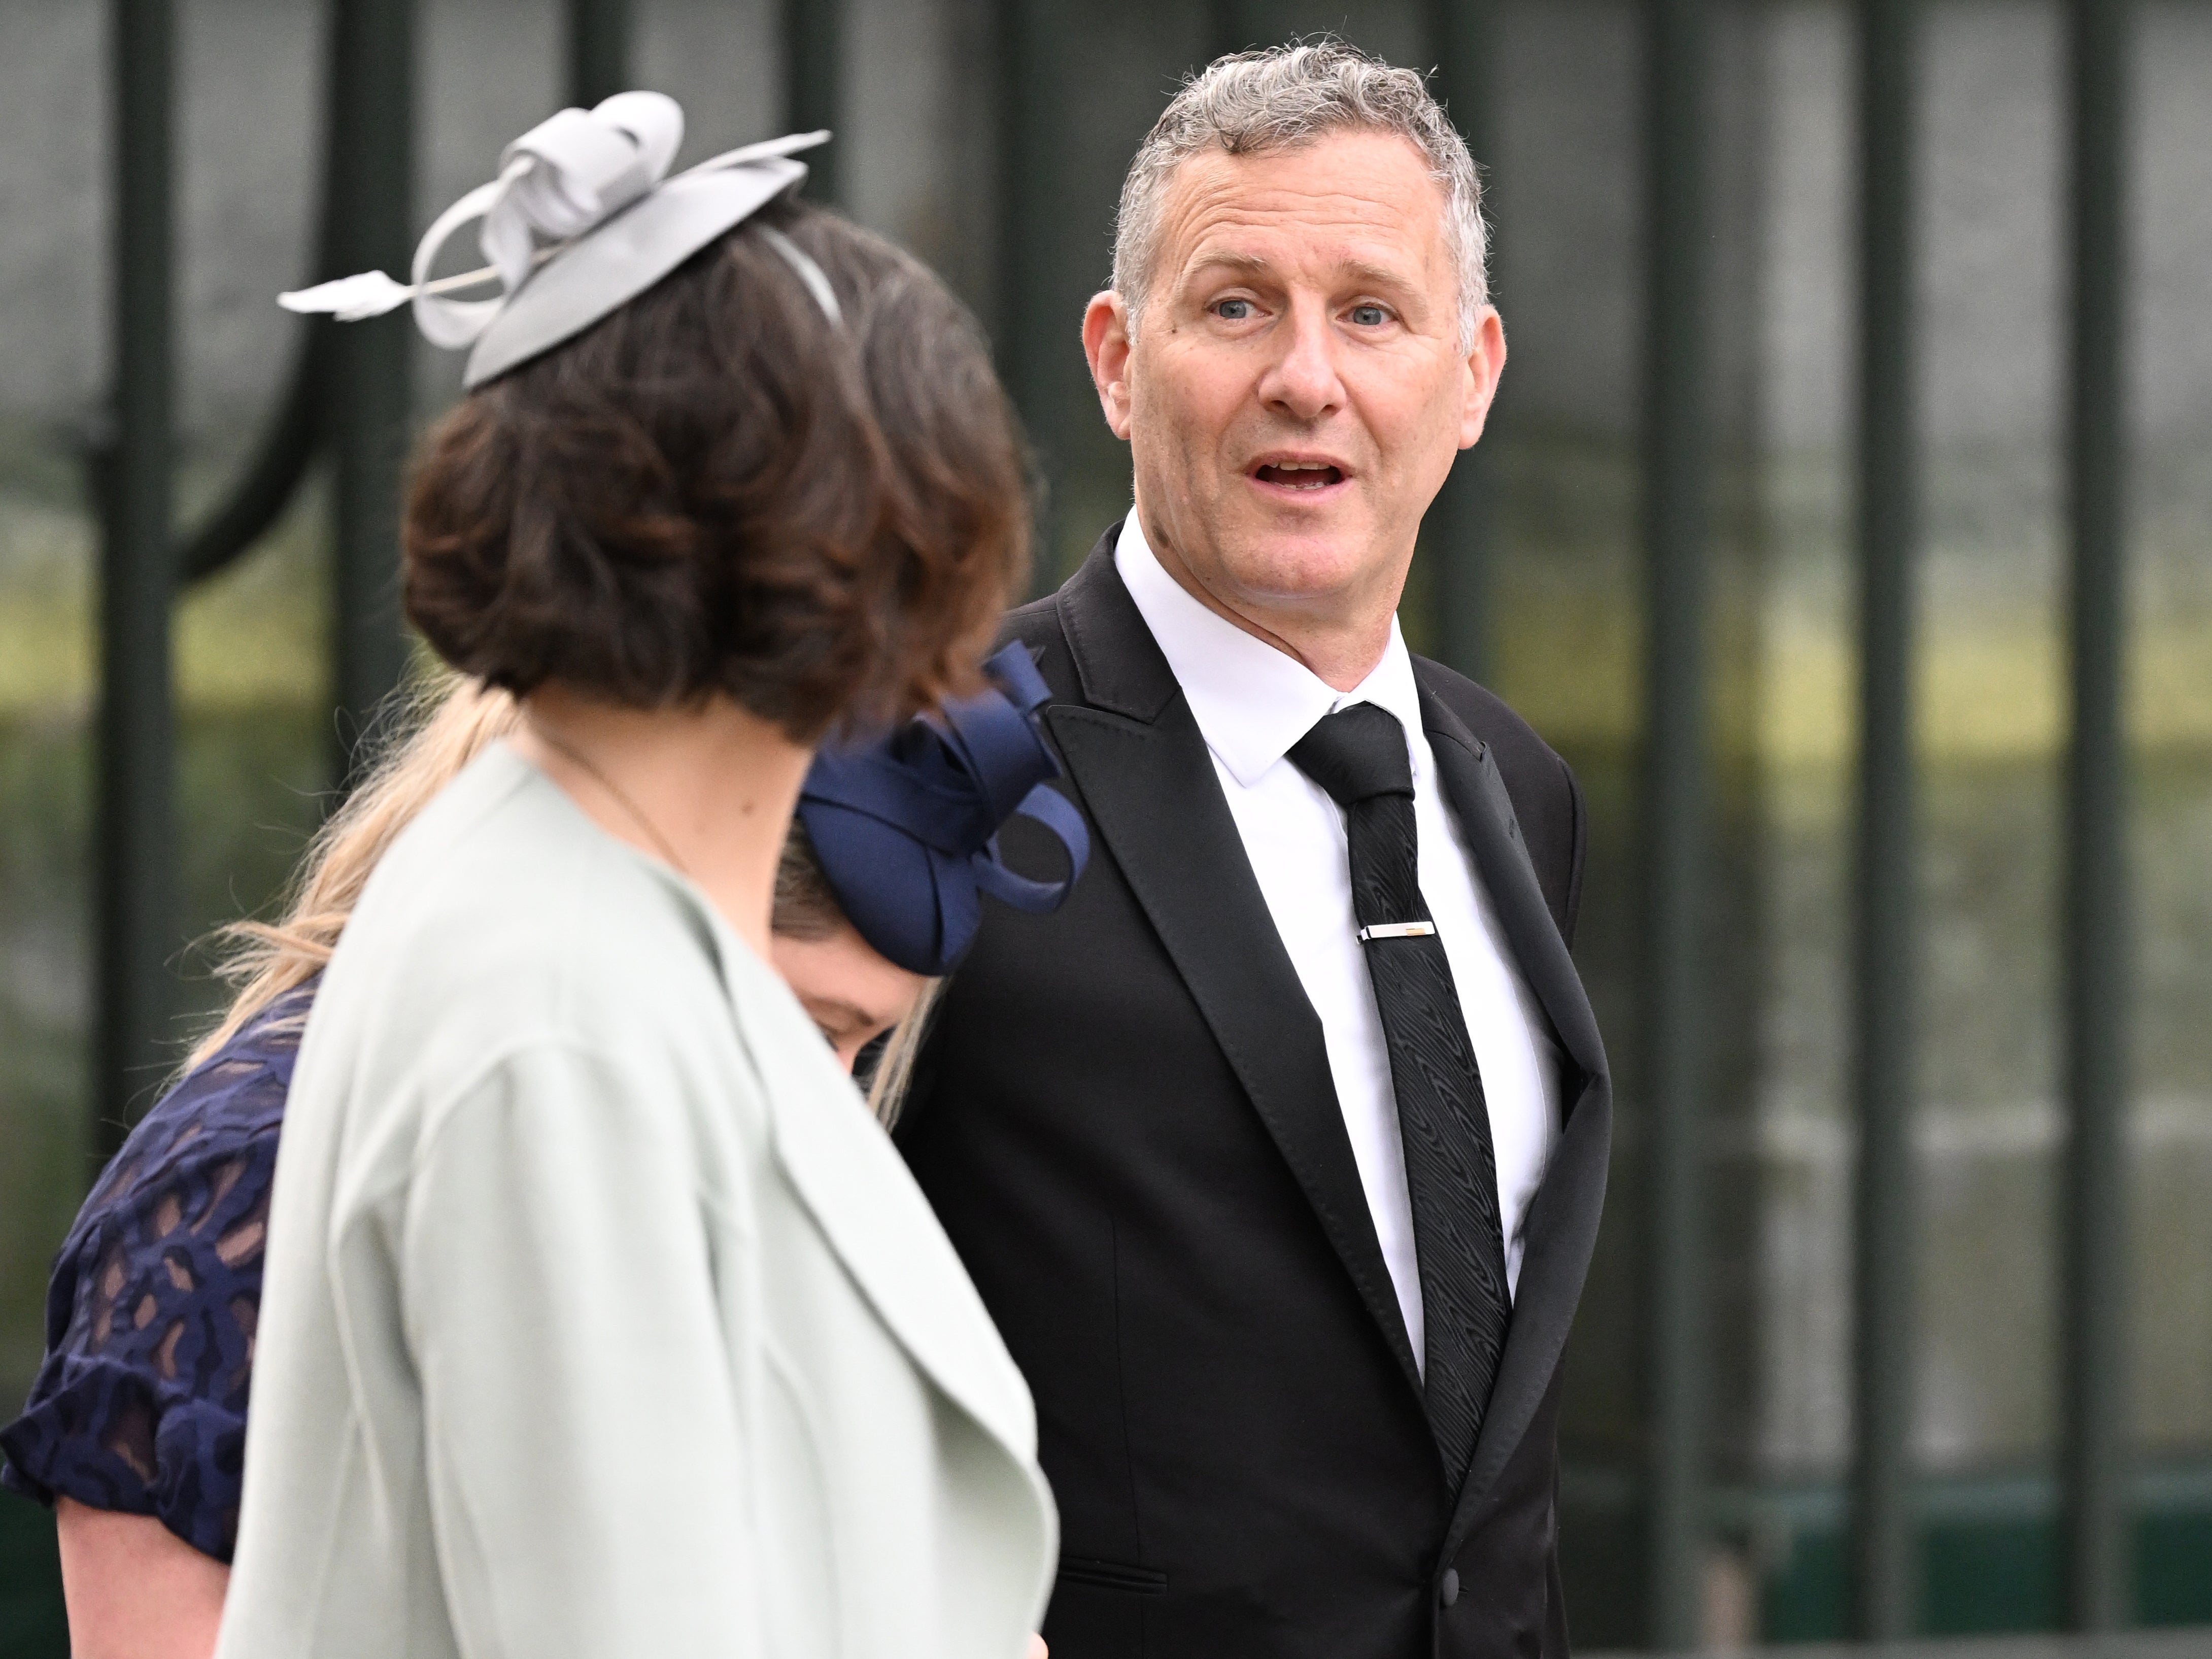 Australian comedian Adam Hills mapped out his toilet breaks ahead of the ceremony